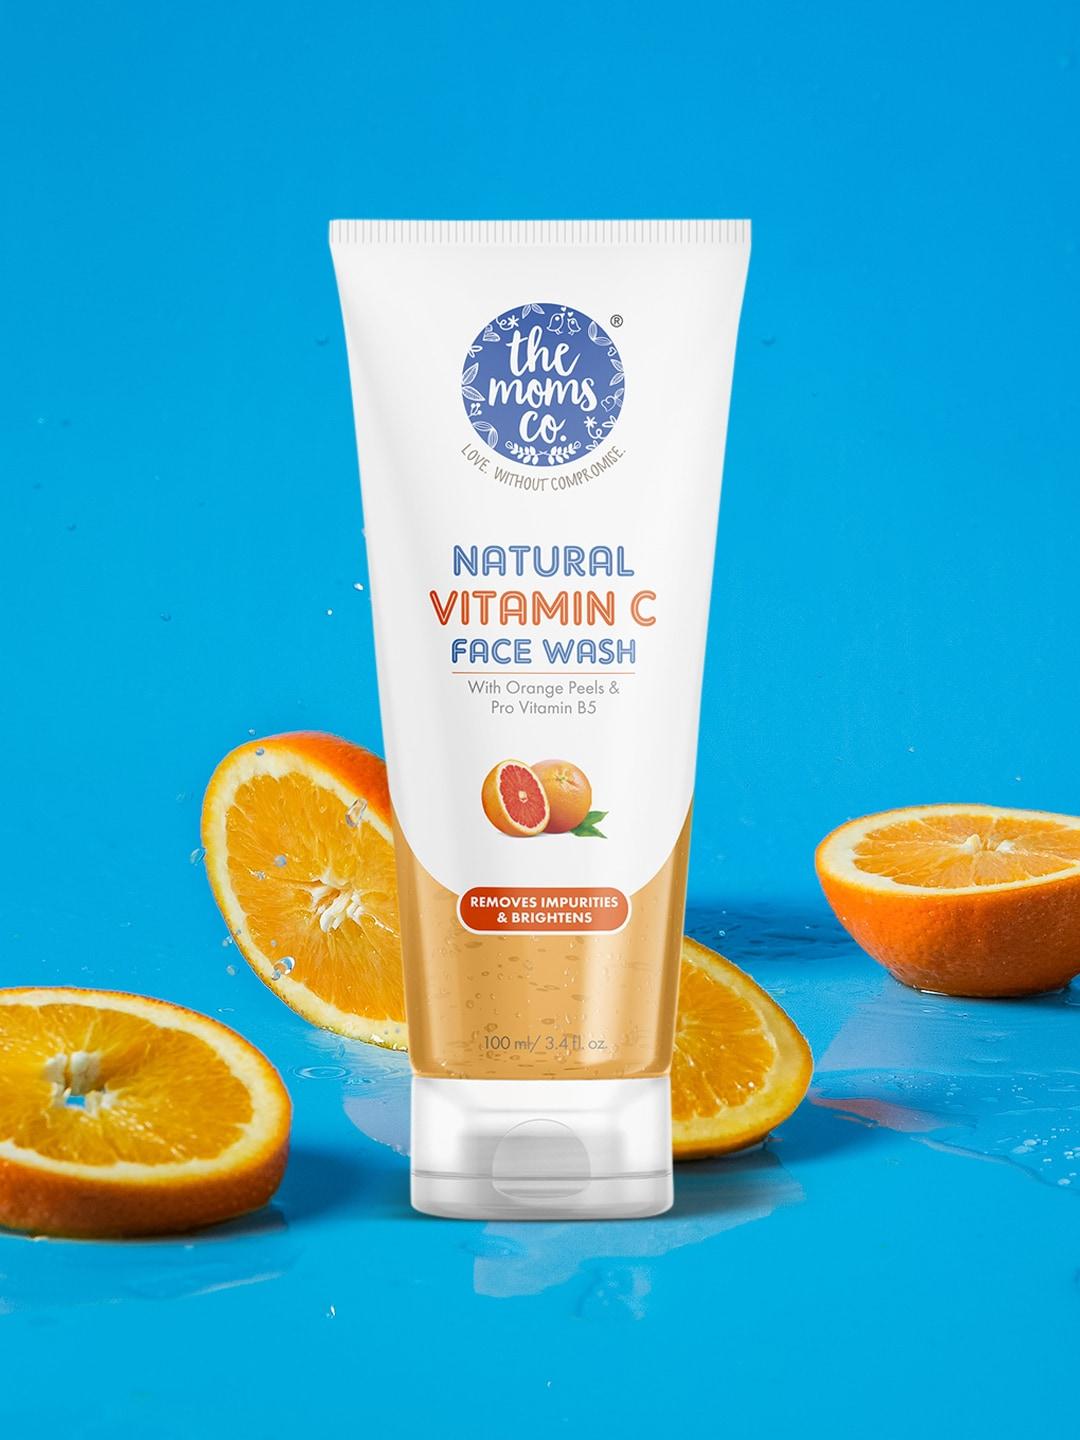 The Moms Co. Vitamin C Face Wash with Orange Beads - Skin Brightening & Uneven Skin Tone